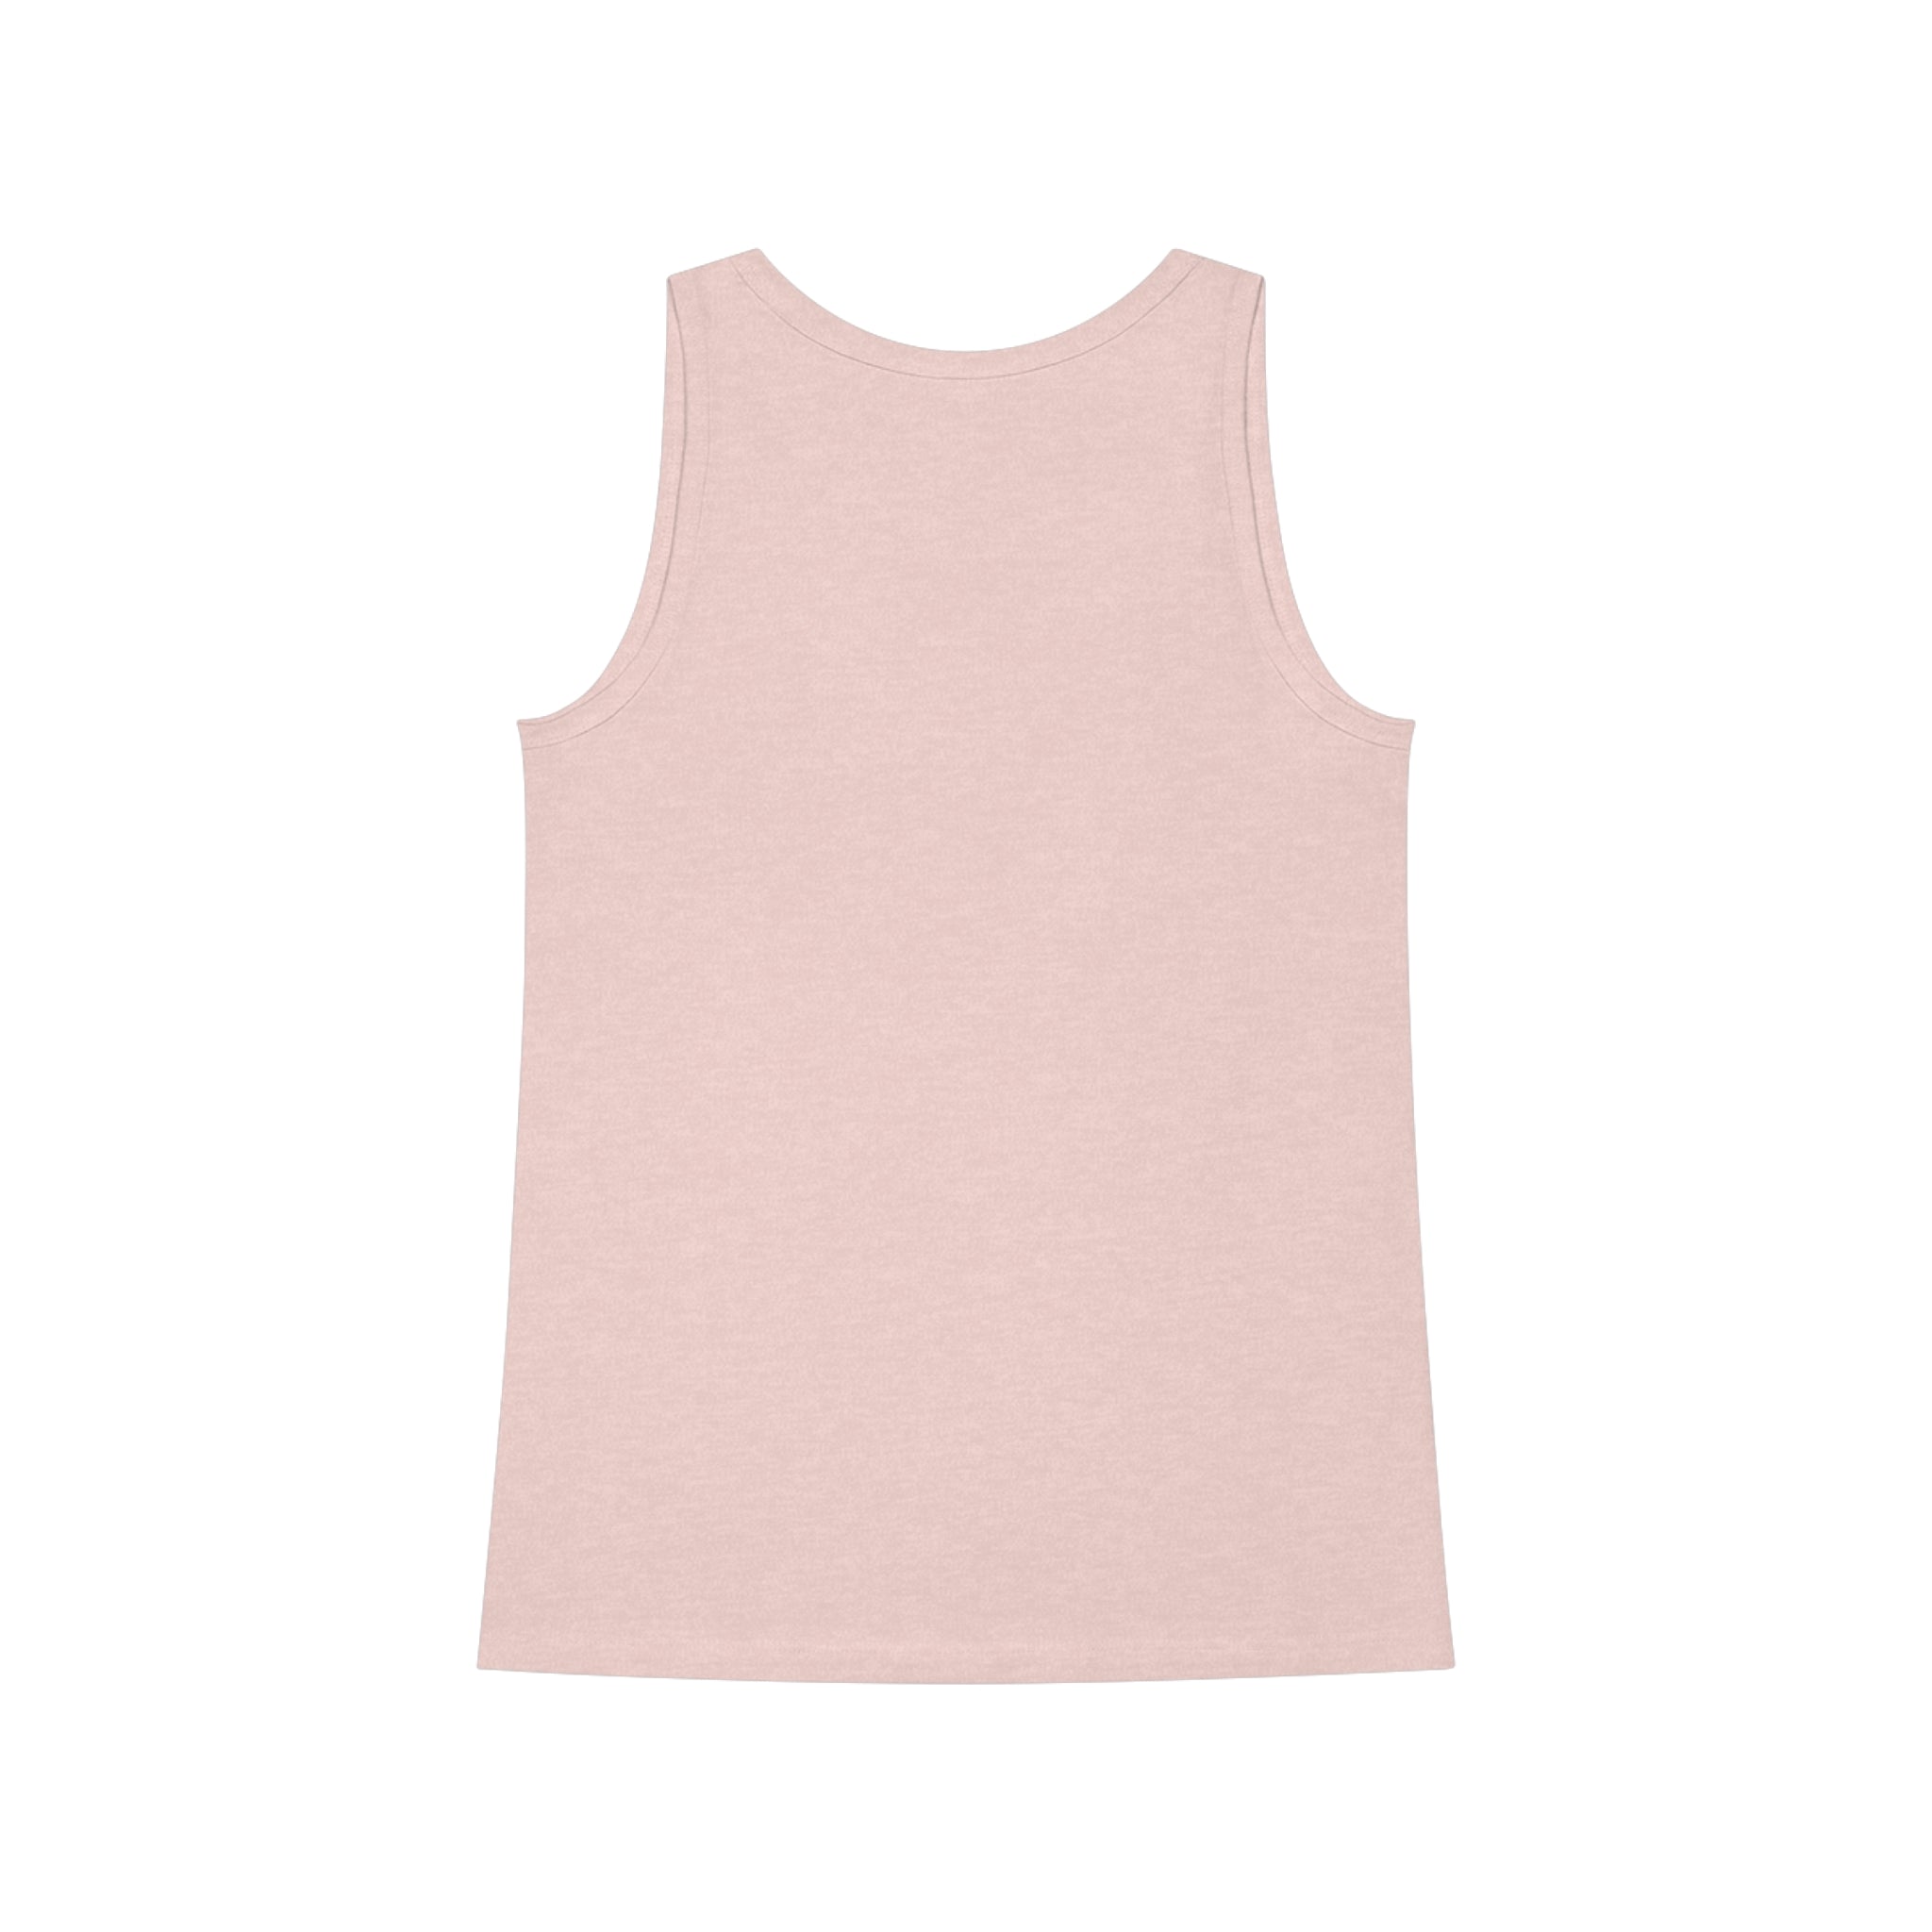 An Anemones Tank Top on a white background.